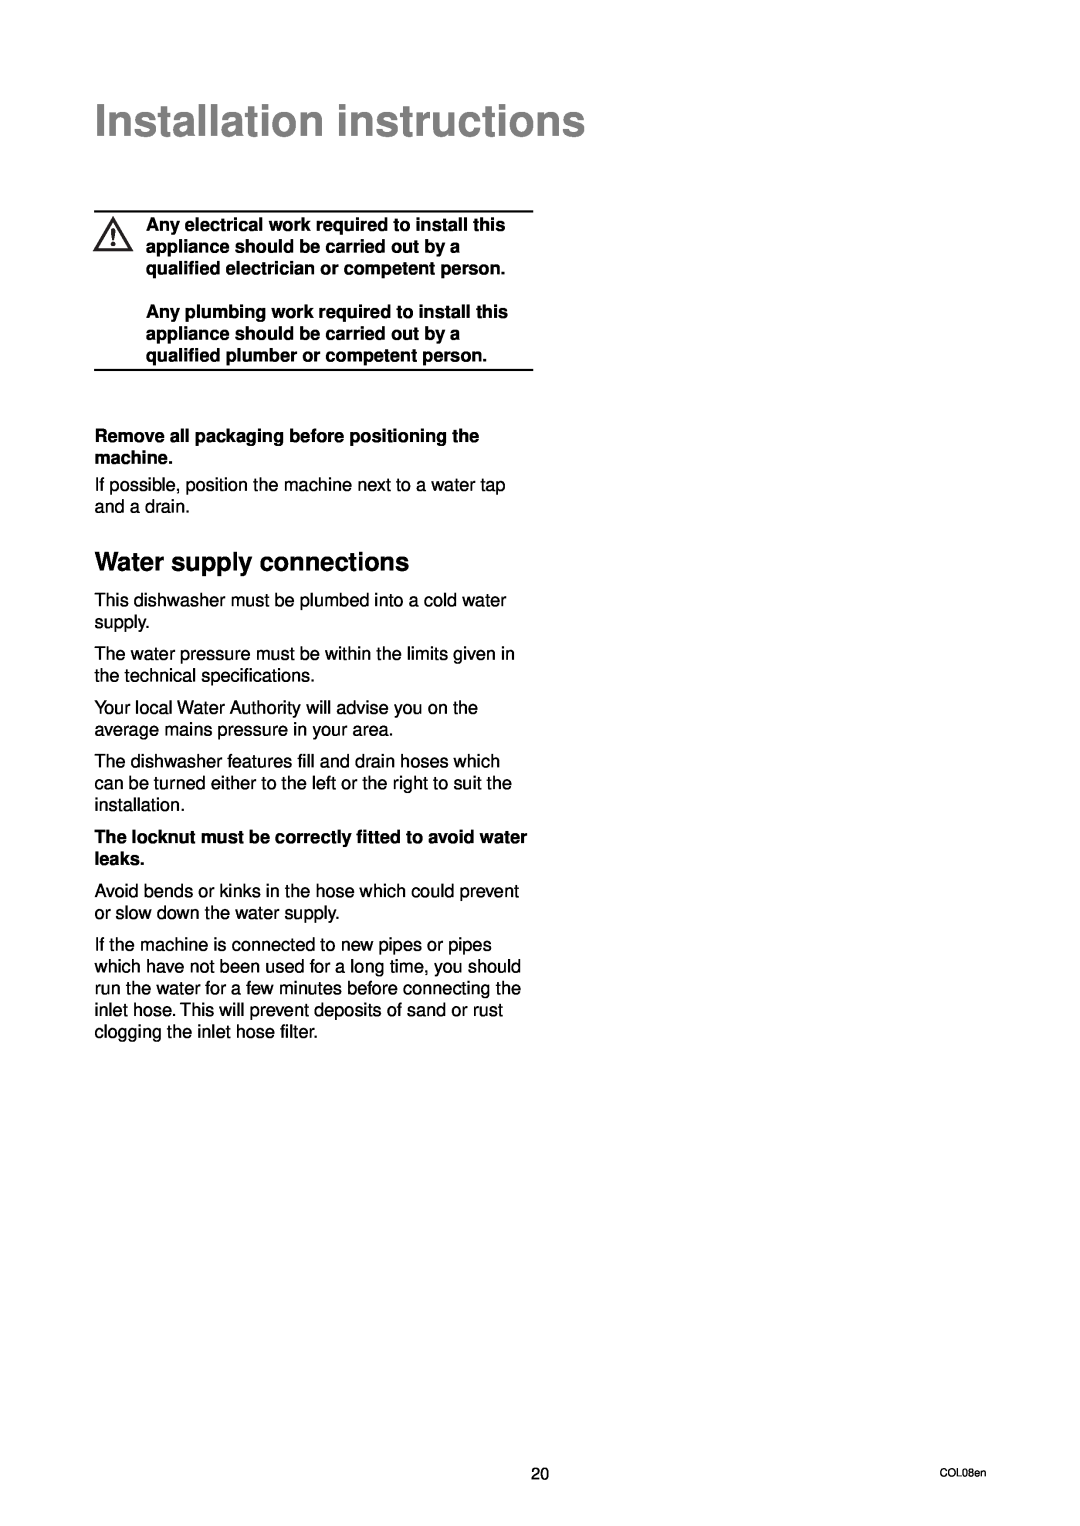 Zanussi DWS 39 manual Installation instructions, Water supply connections 